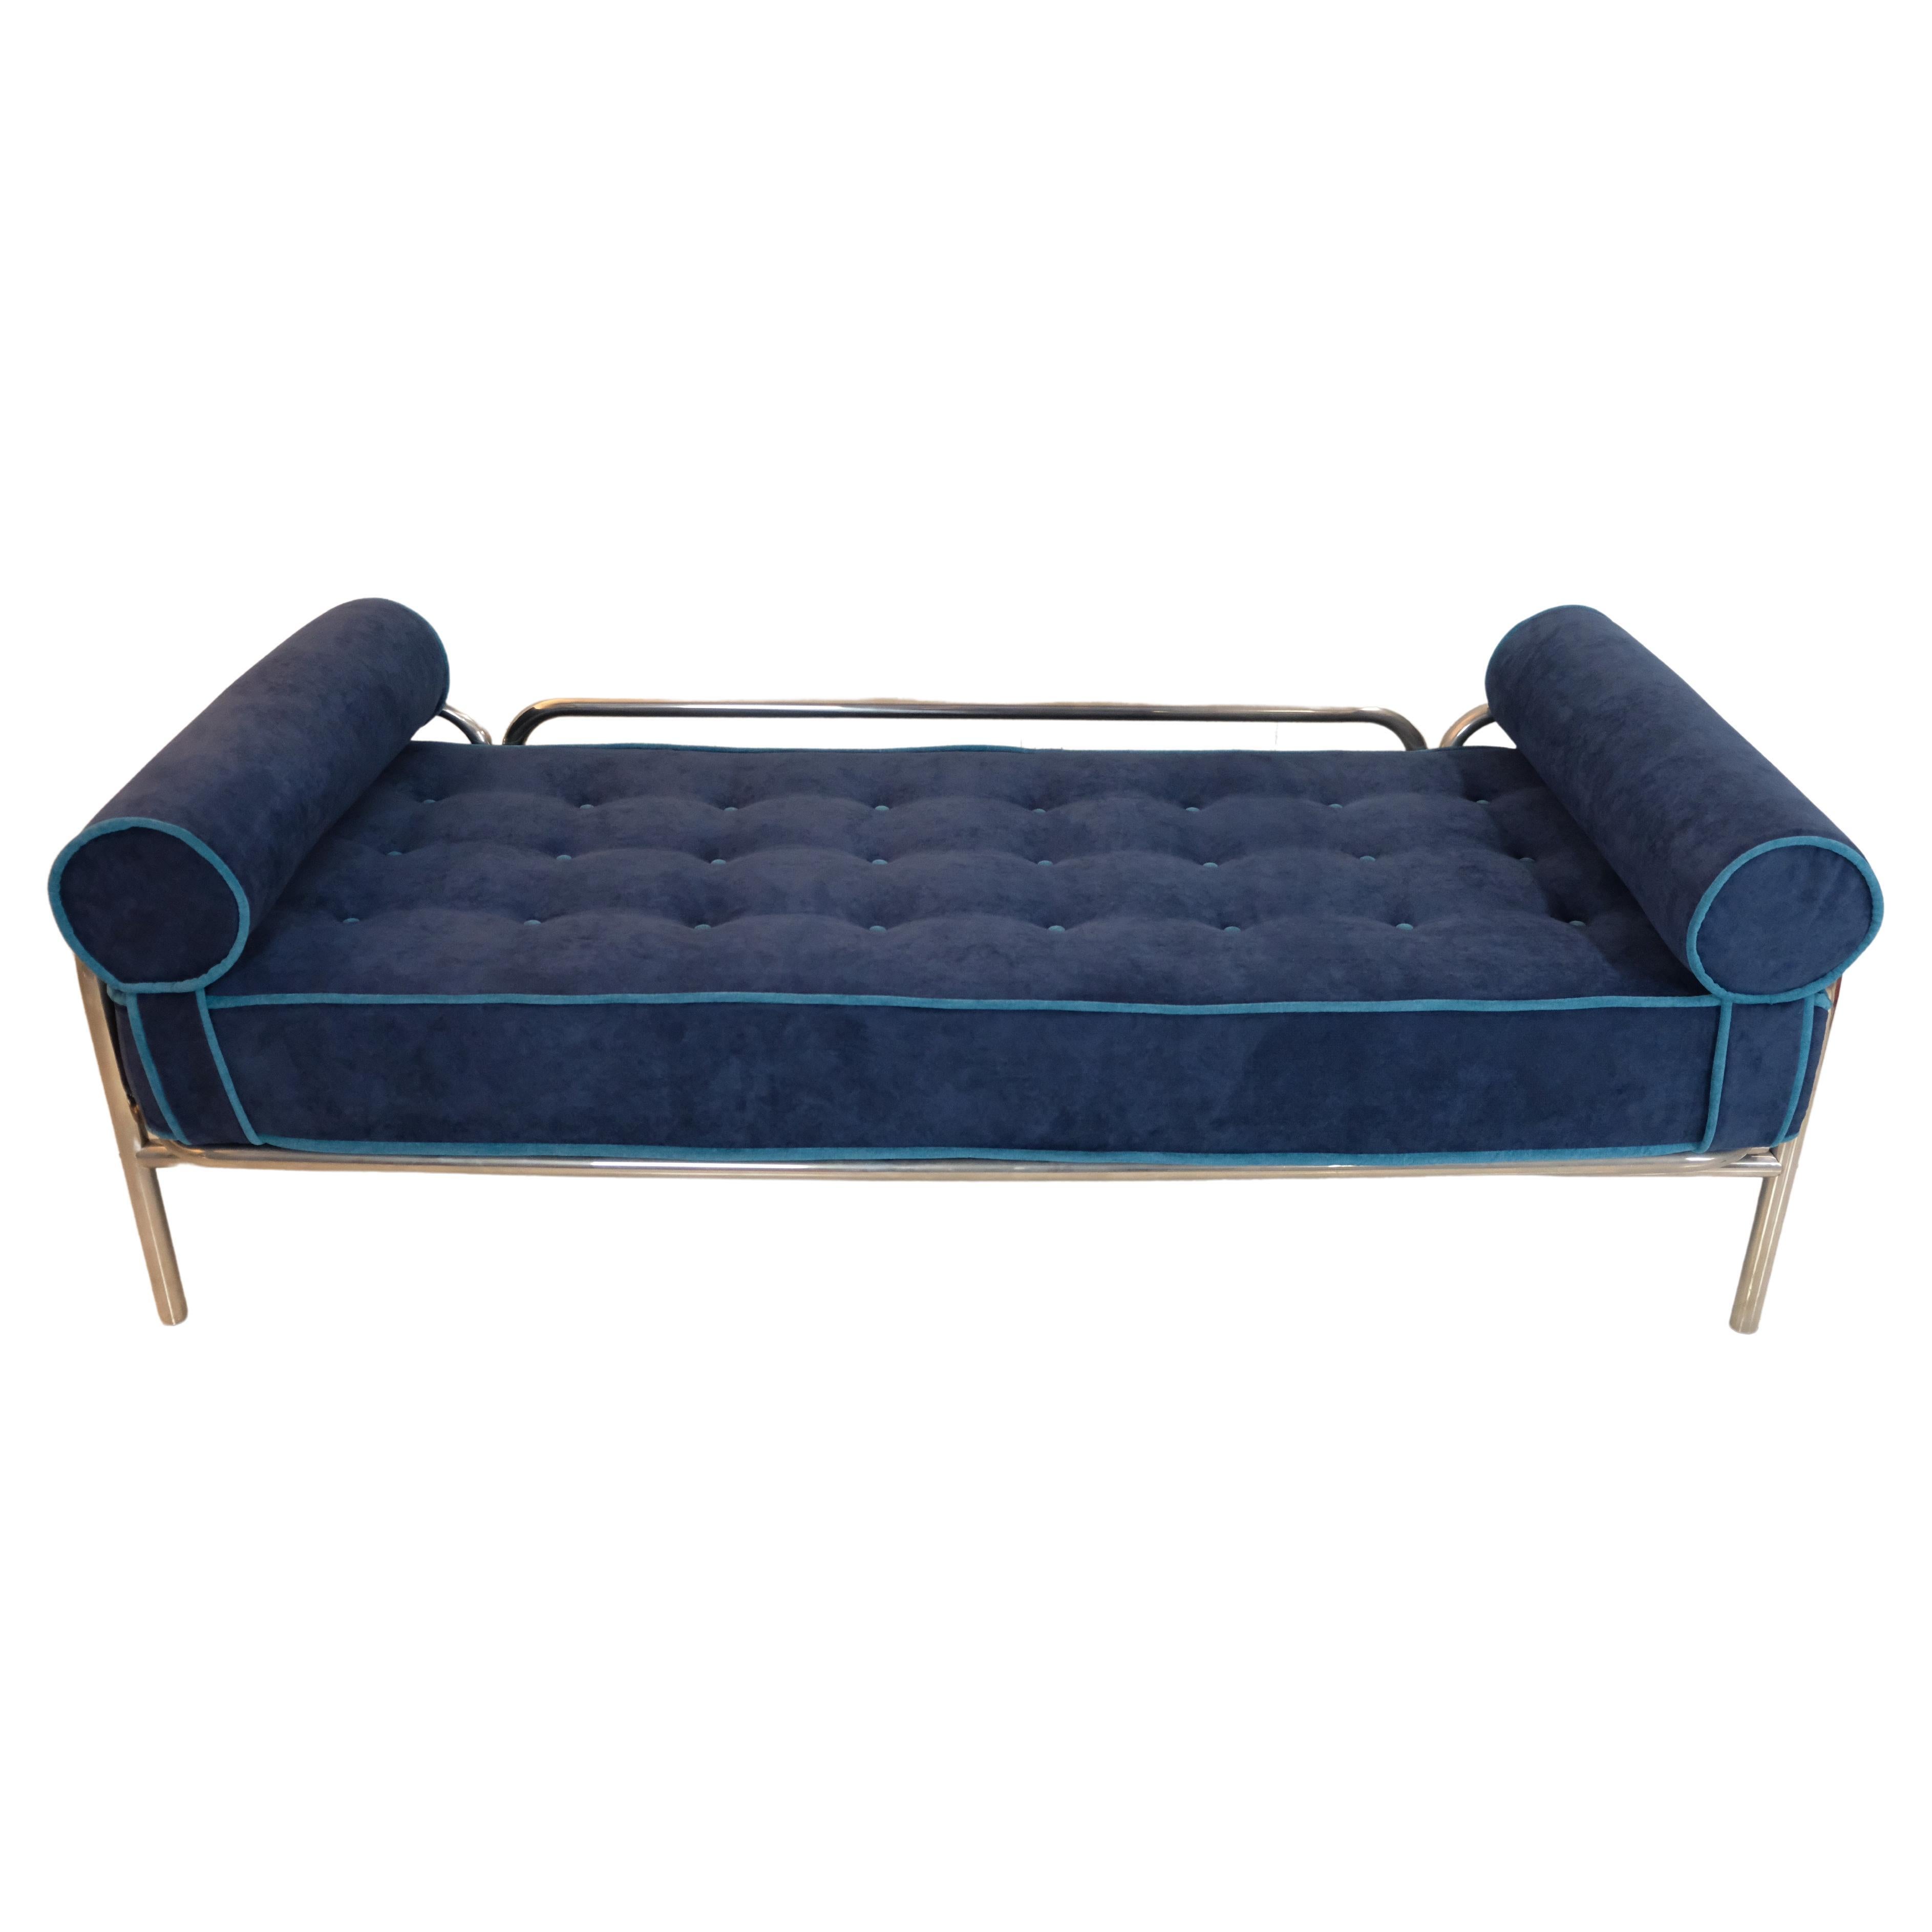 Locus Solus daybed by Gae Aulenti for Poltronova 60s, 70s For Sale